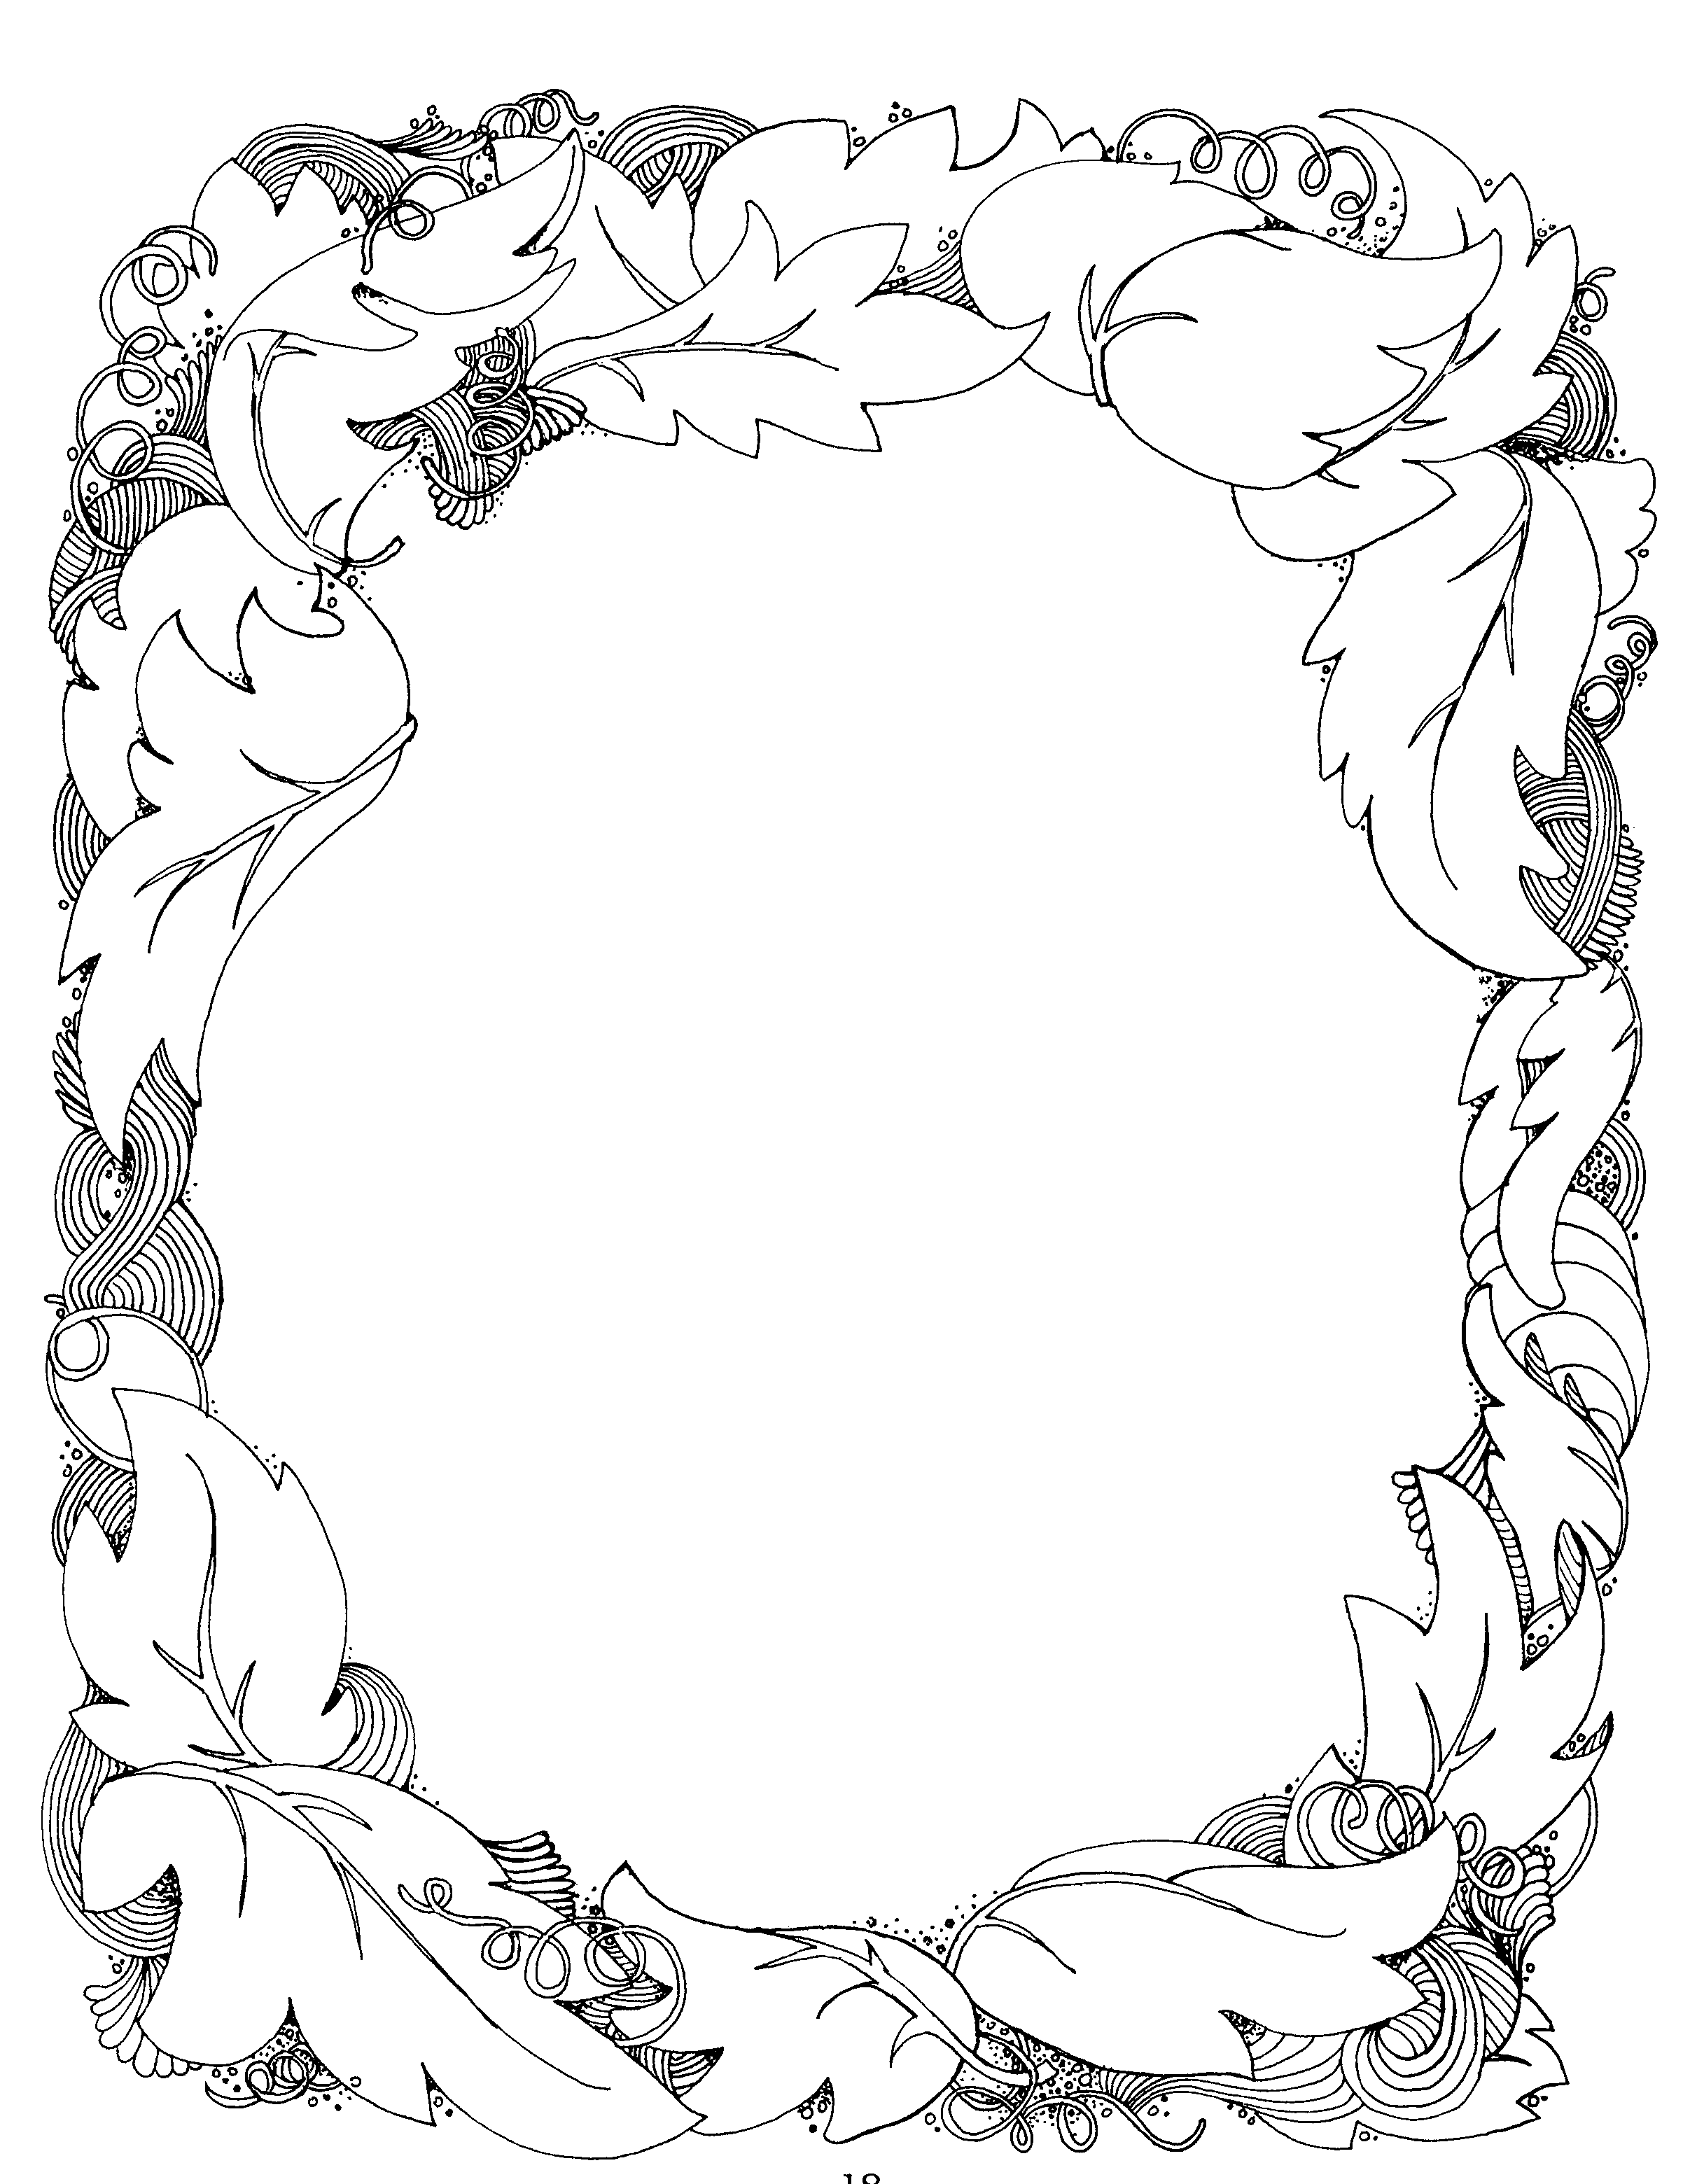 Free Simple Page Border Designs To Draw, Download Free Simple Page